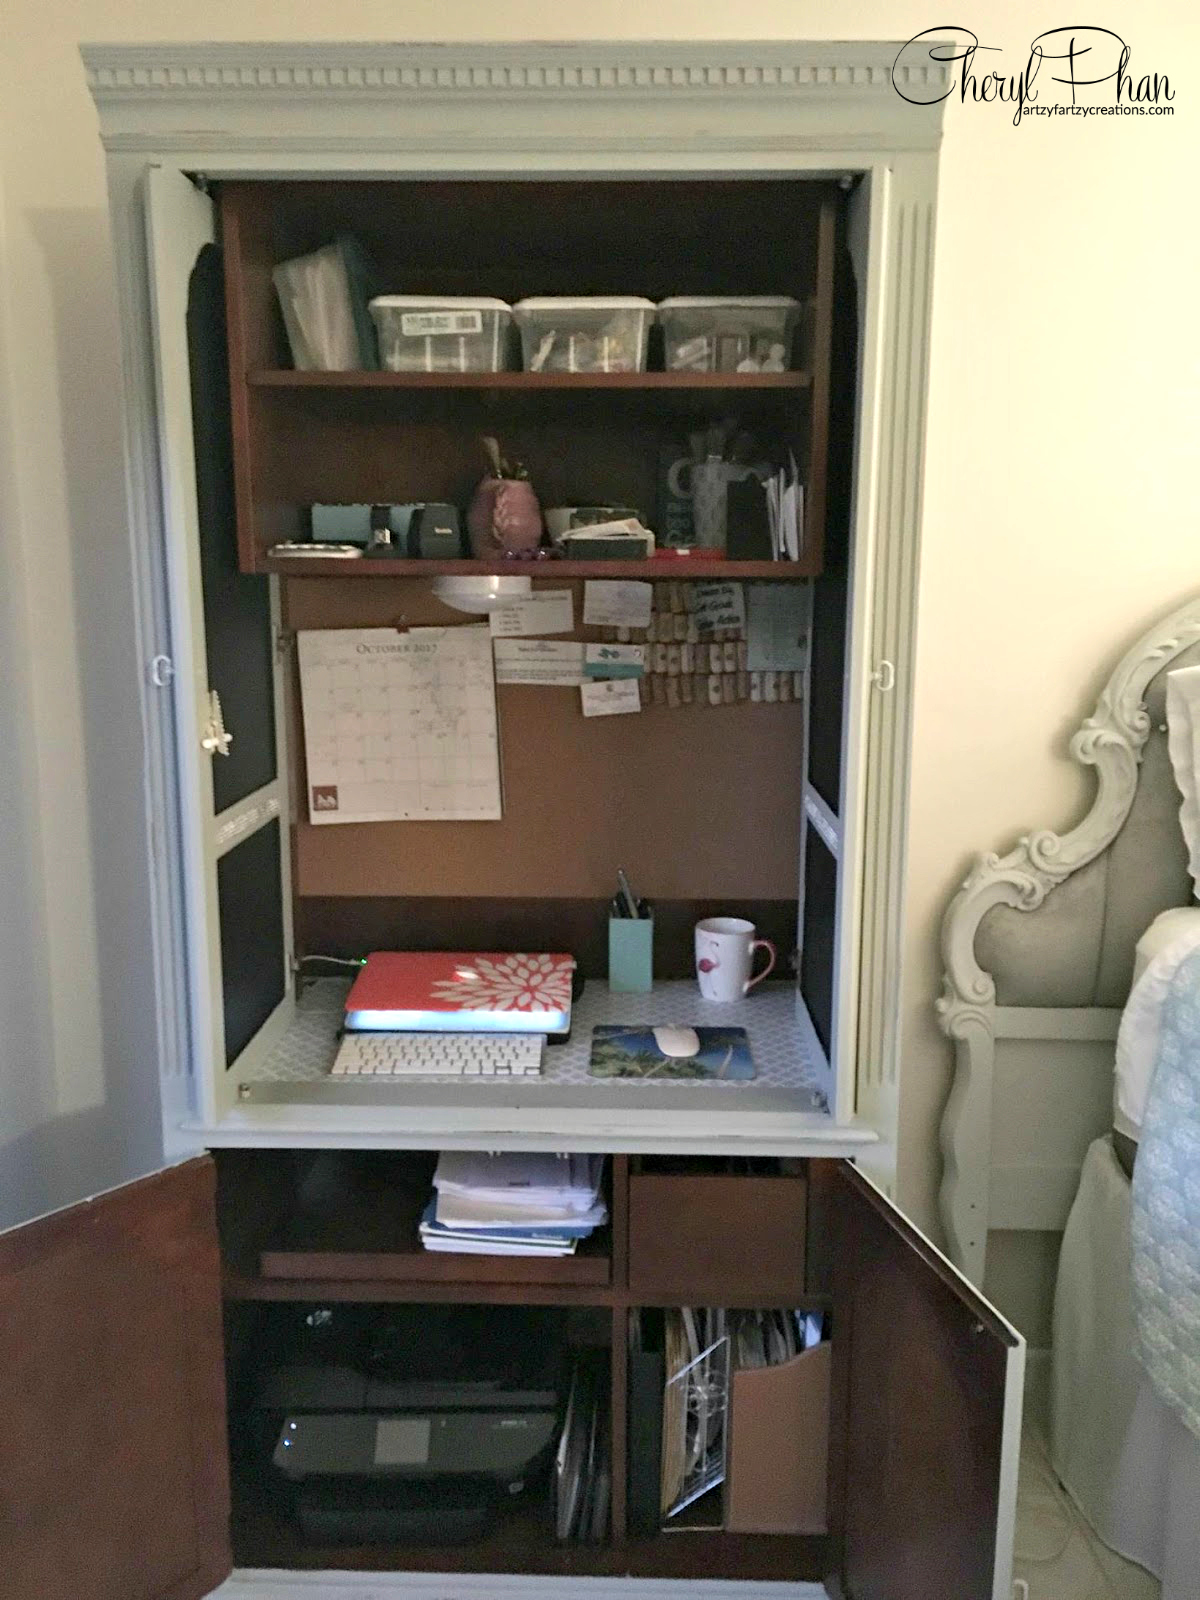 Office in an Armoire by Cheryl Phan